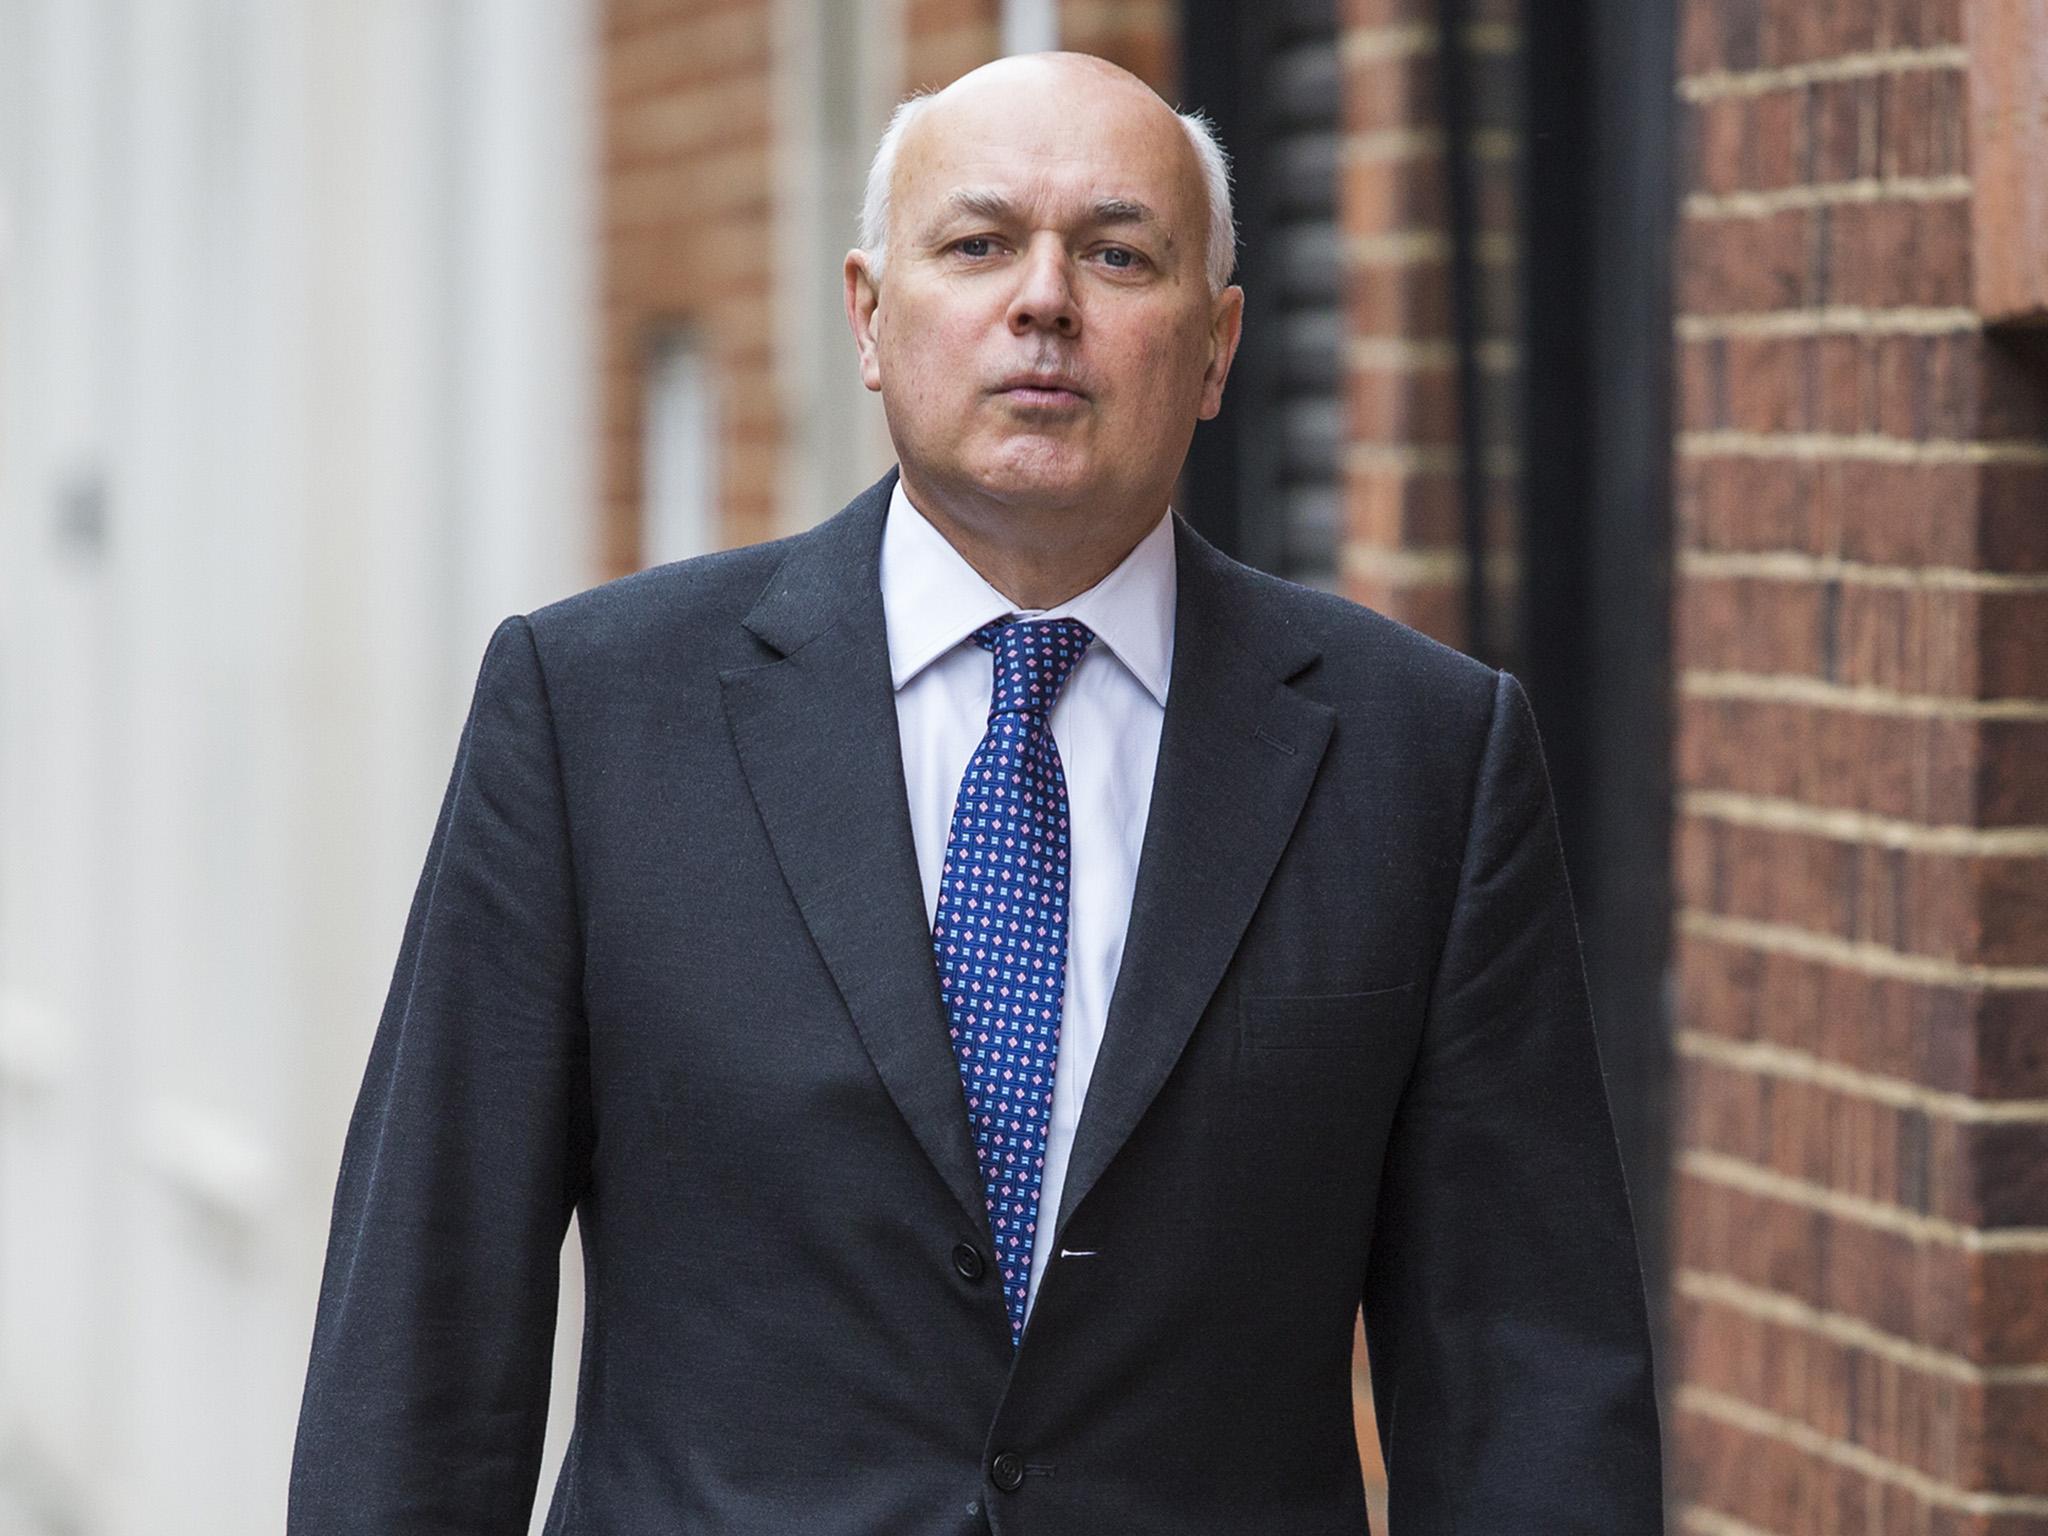 Iain Duncan Smith has called for Brexit talks to begin 'as soon as possible'